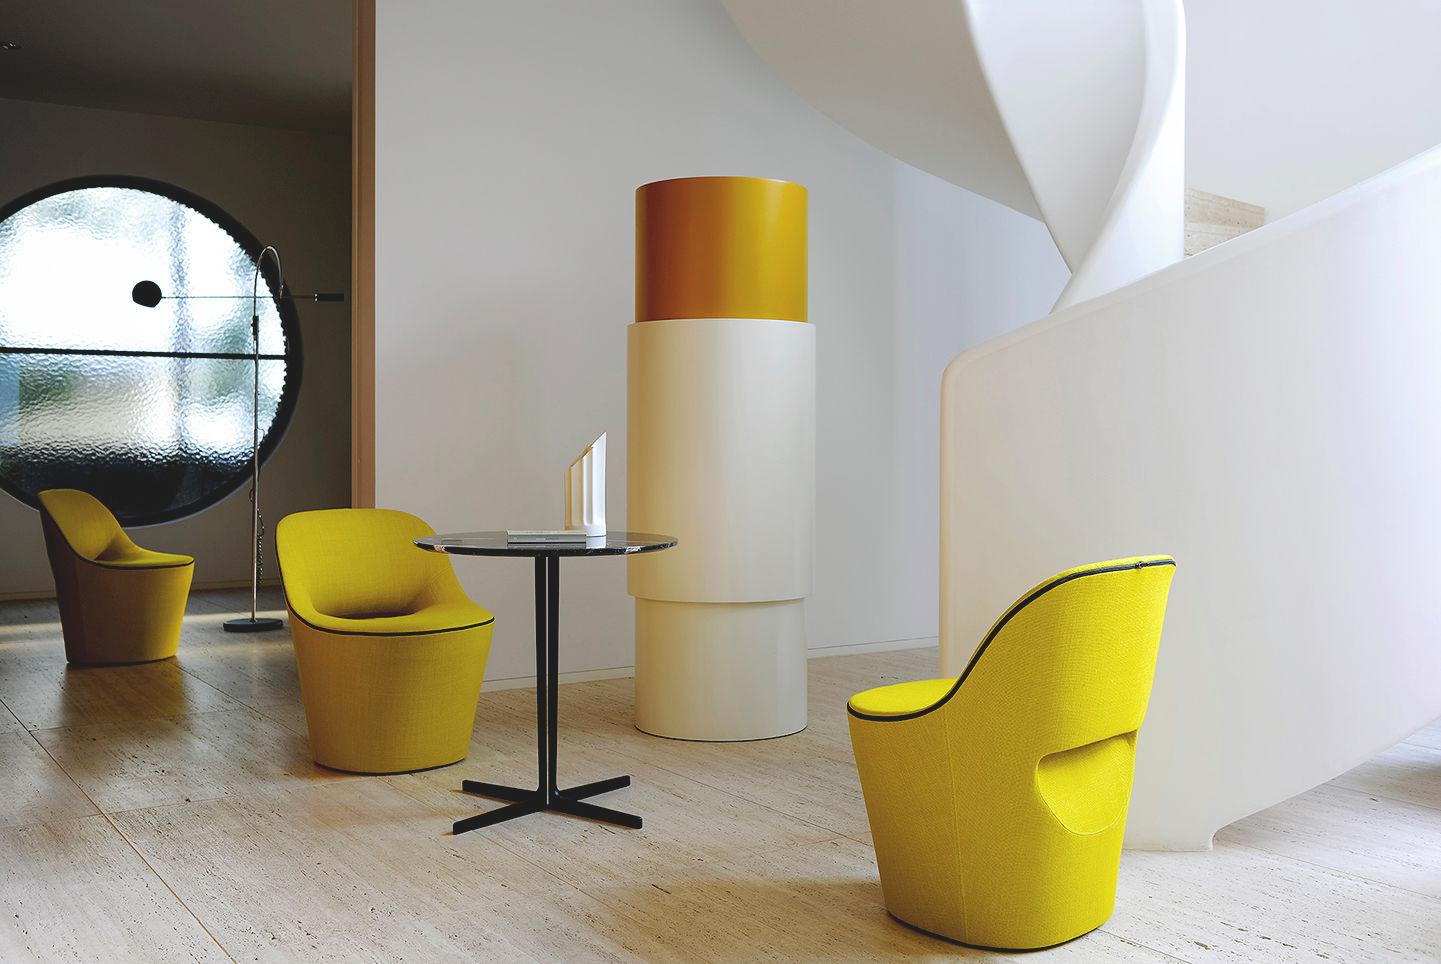 From the British PearsonLloyd design studio, Eddy is a boldly charming chair. This sleek, compact armchair features distinctive lines and ample opportunities for customization in choice of upholstery. An aesthetic convergence point is formed where